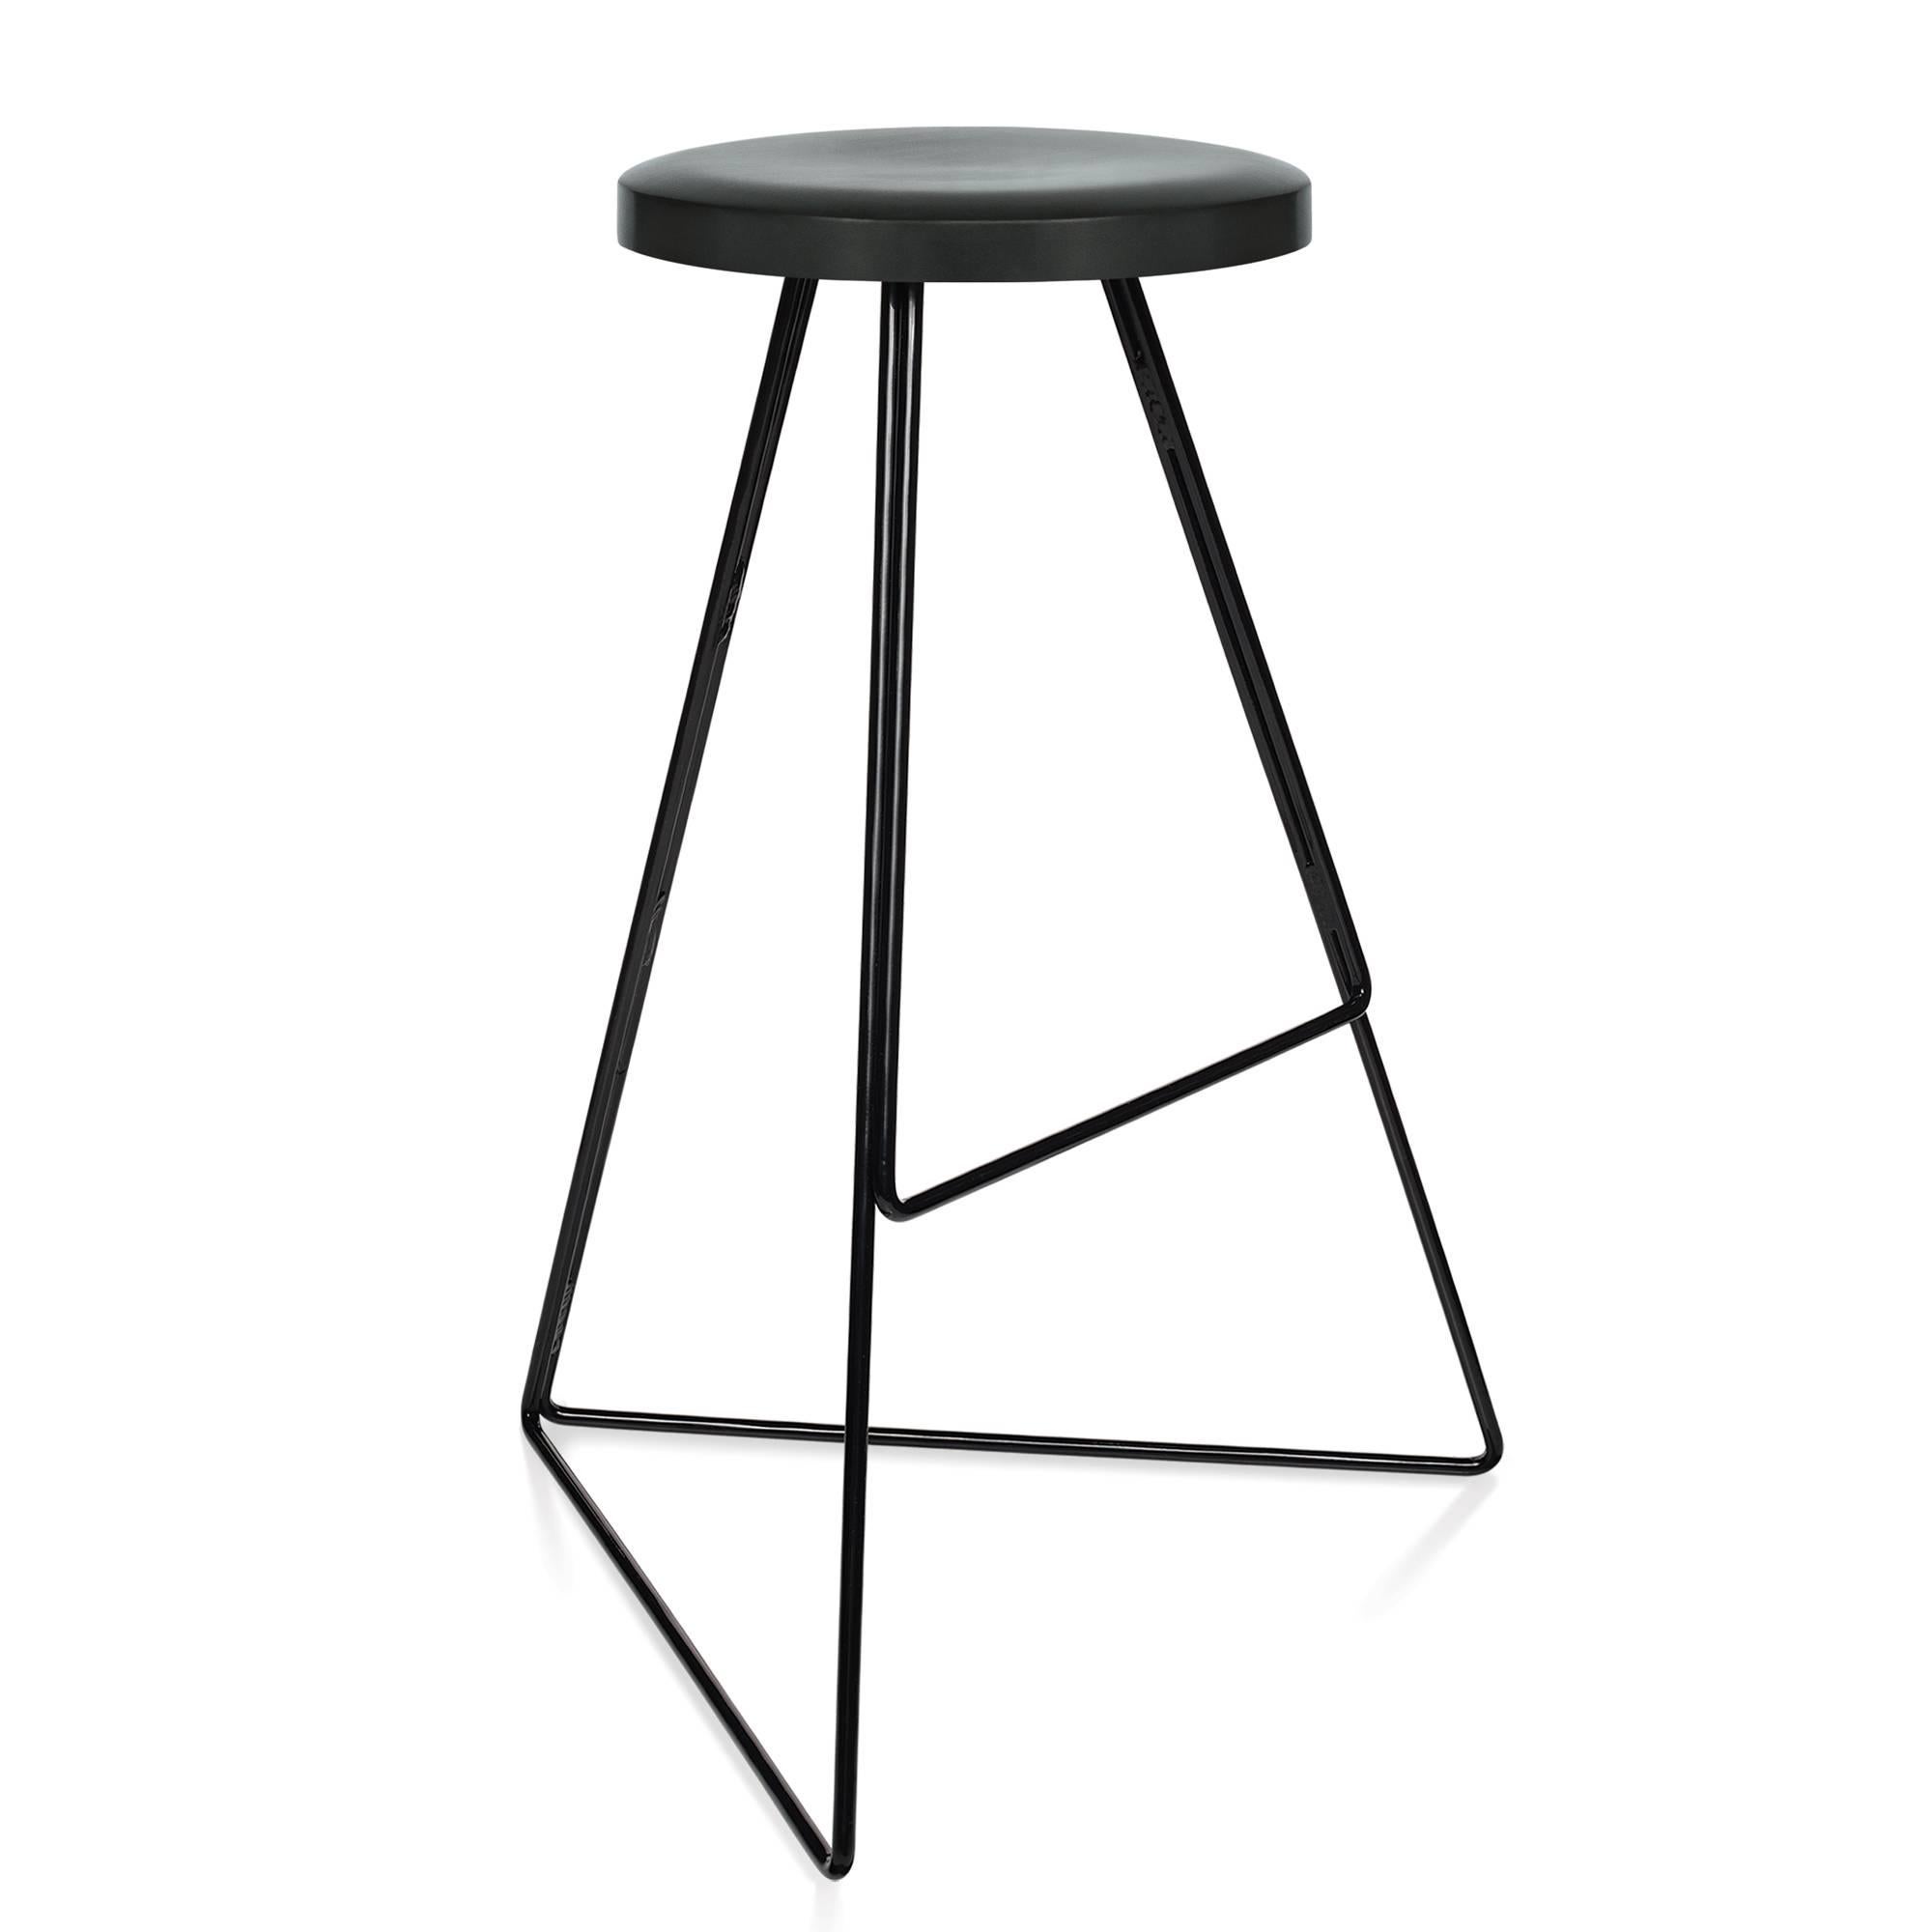 The Coleman Stool. Black & Charcoal, Bar Height. 54 Variations in Color & Height For Sale